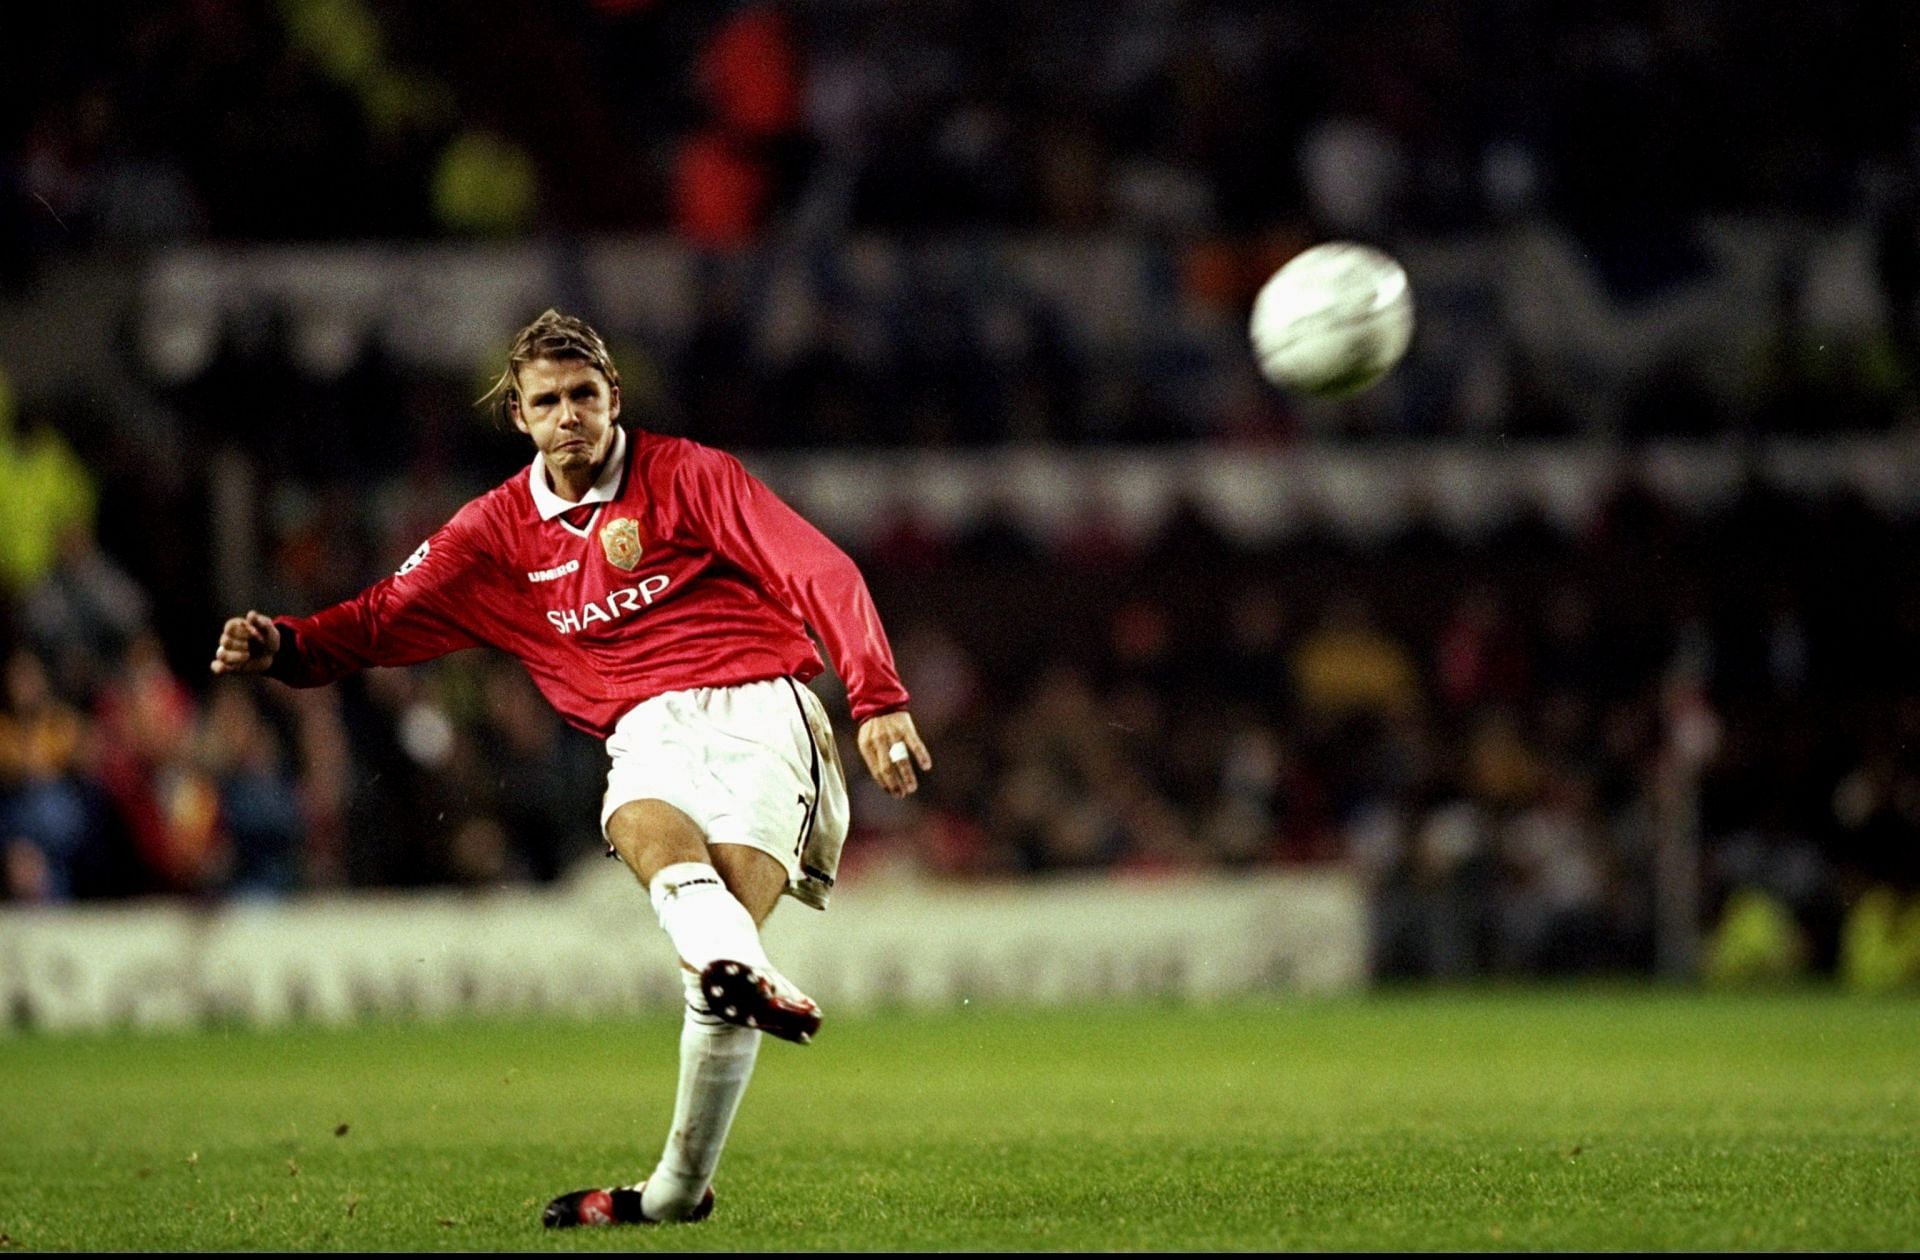 David Beckham during his time at Manchester United